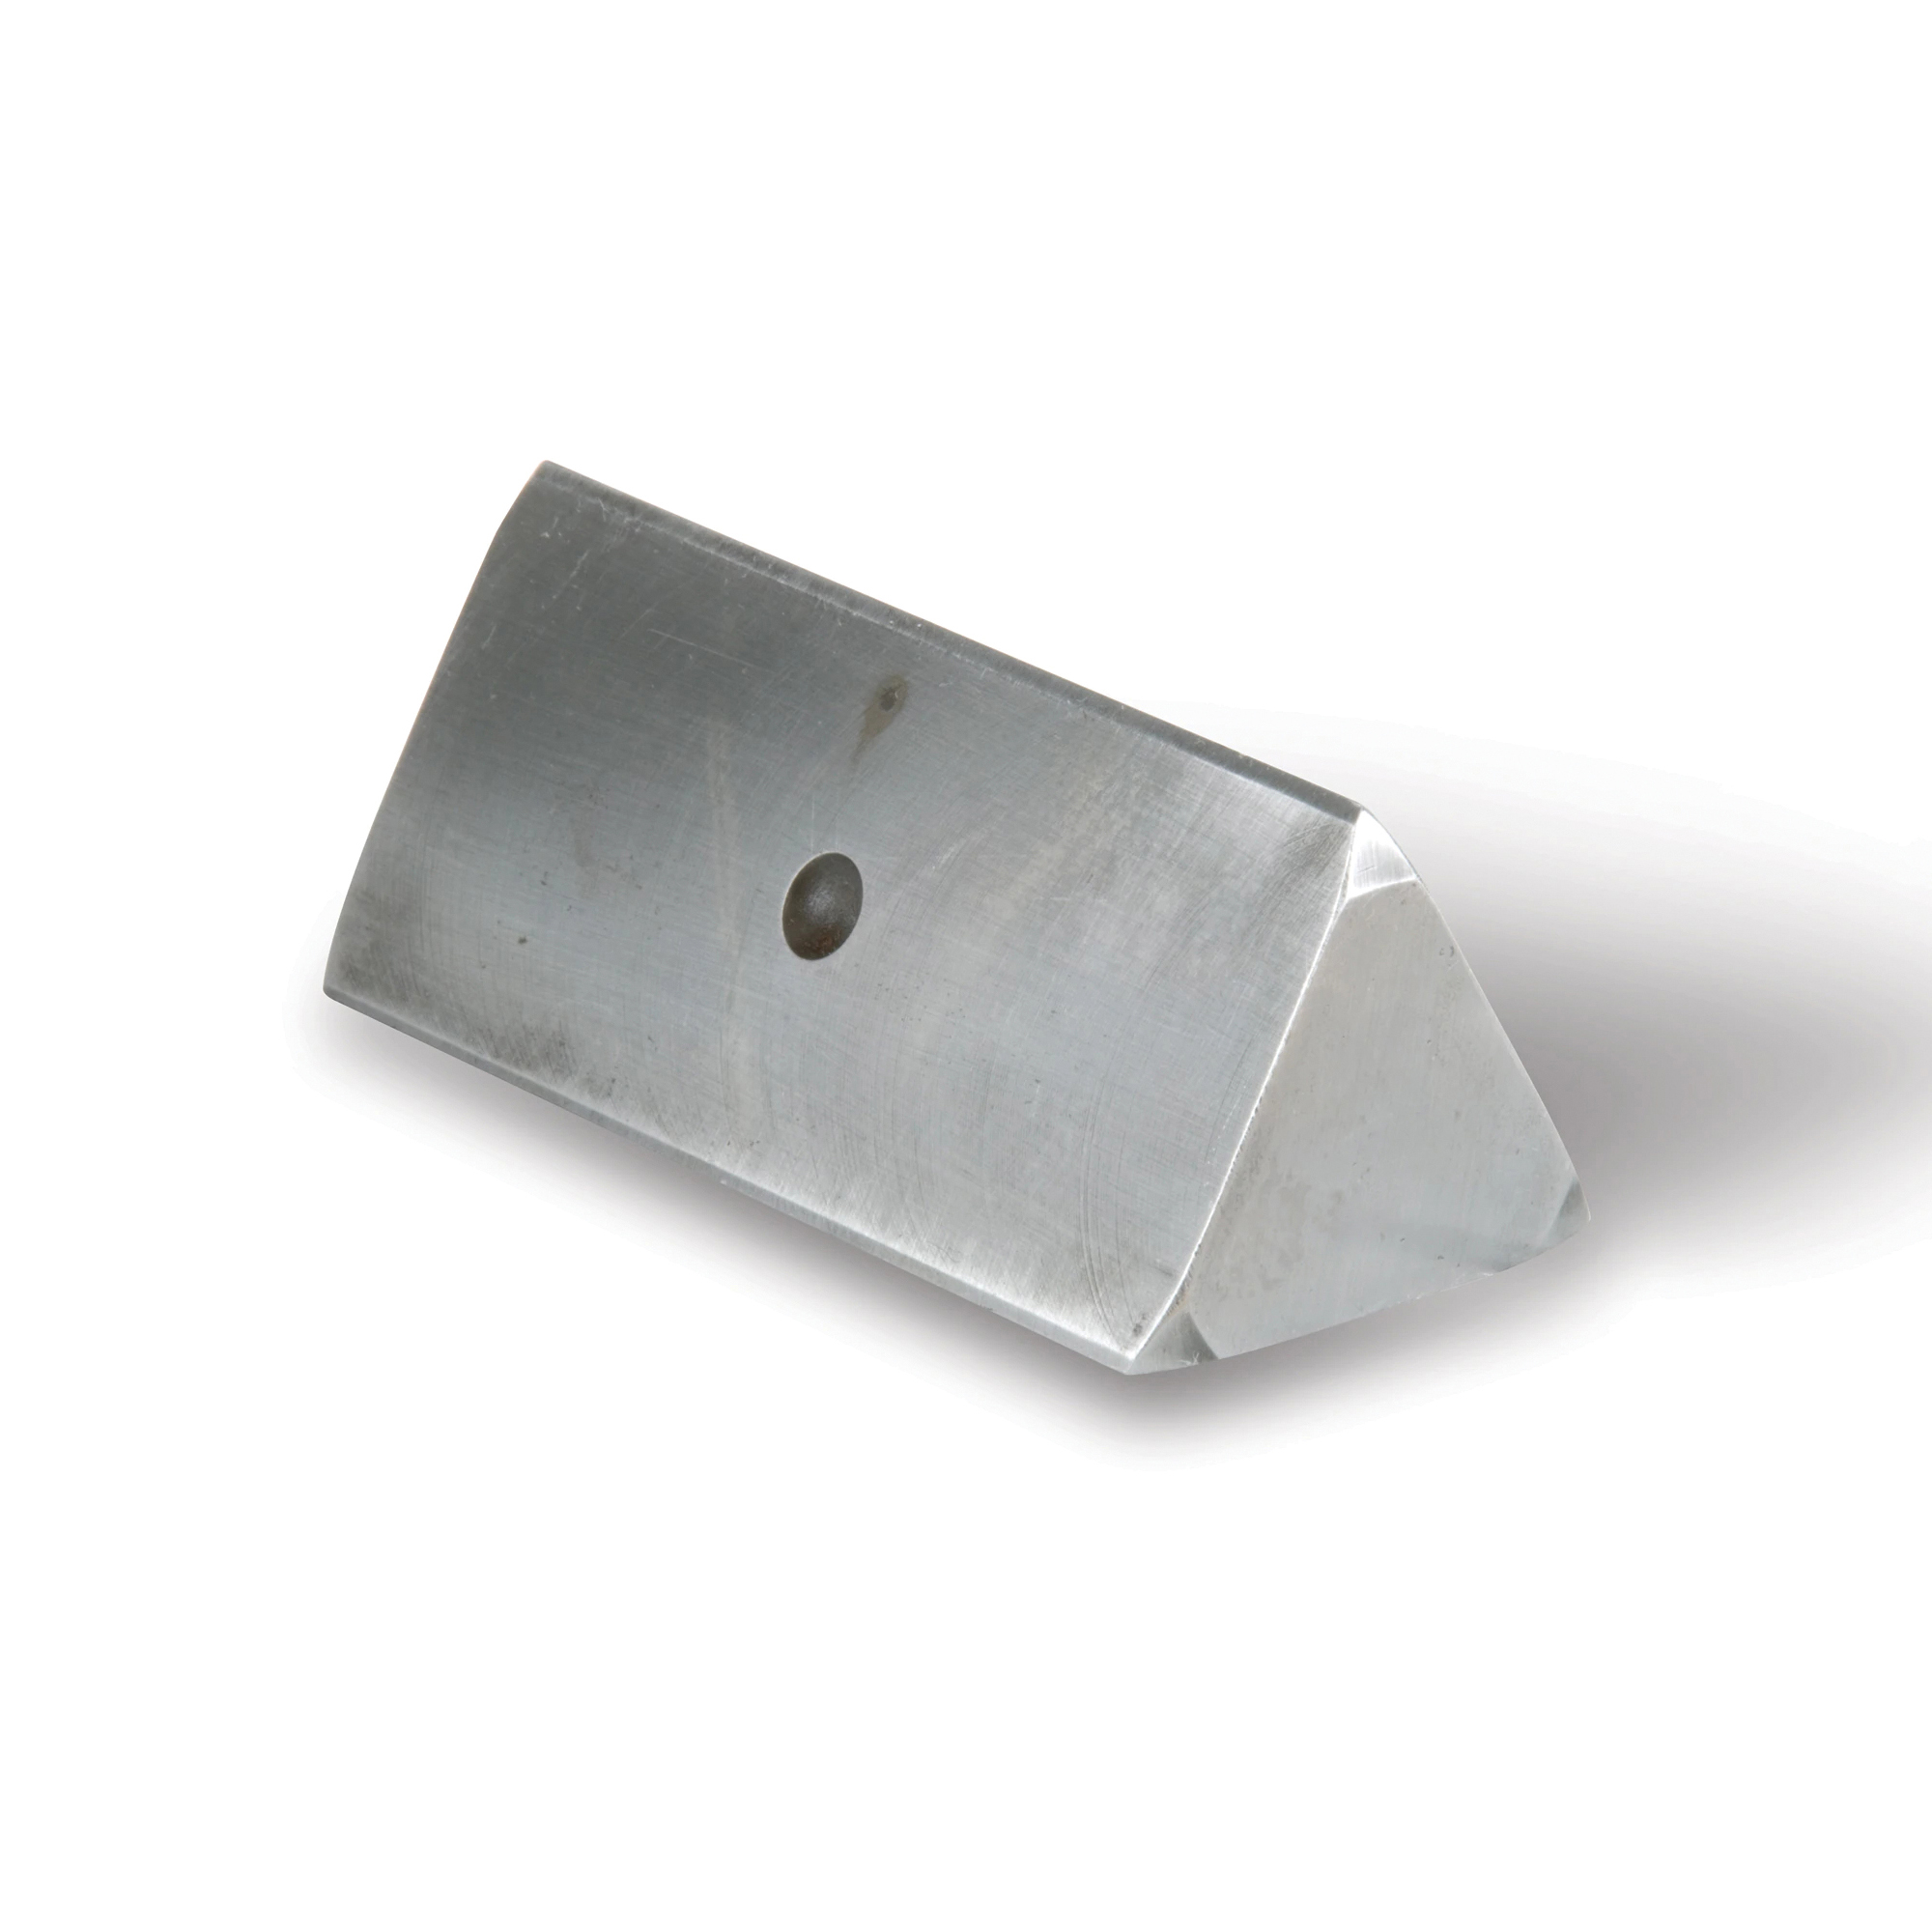 ENERPAC® NSB NSB70 Nut Splitter Blade, For Use With: NS7080, NS7085, NS7095, NS70105 Hydraulic Nut Splitters